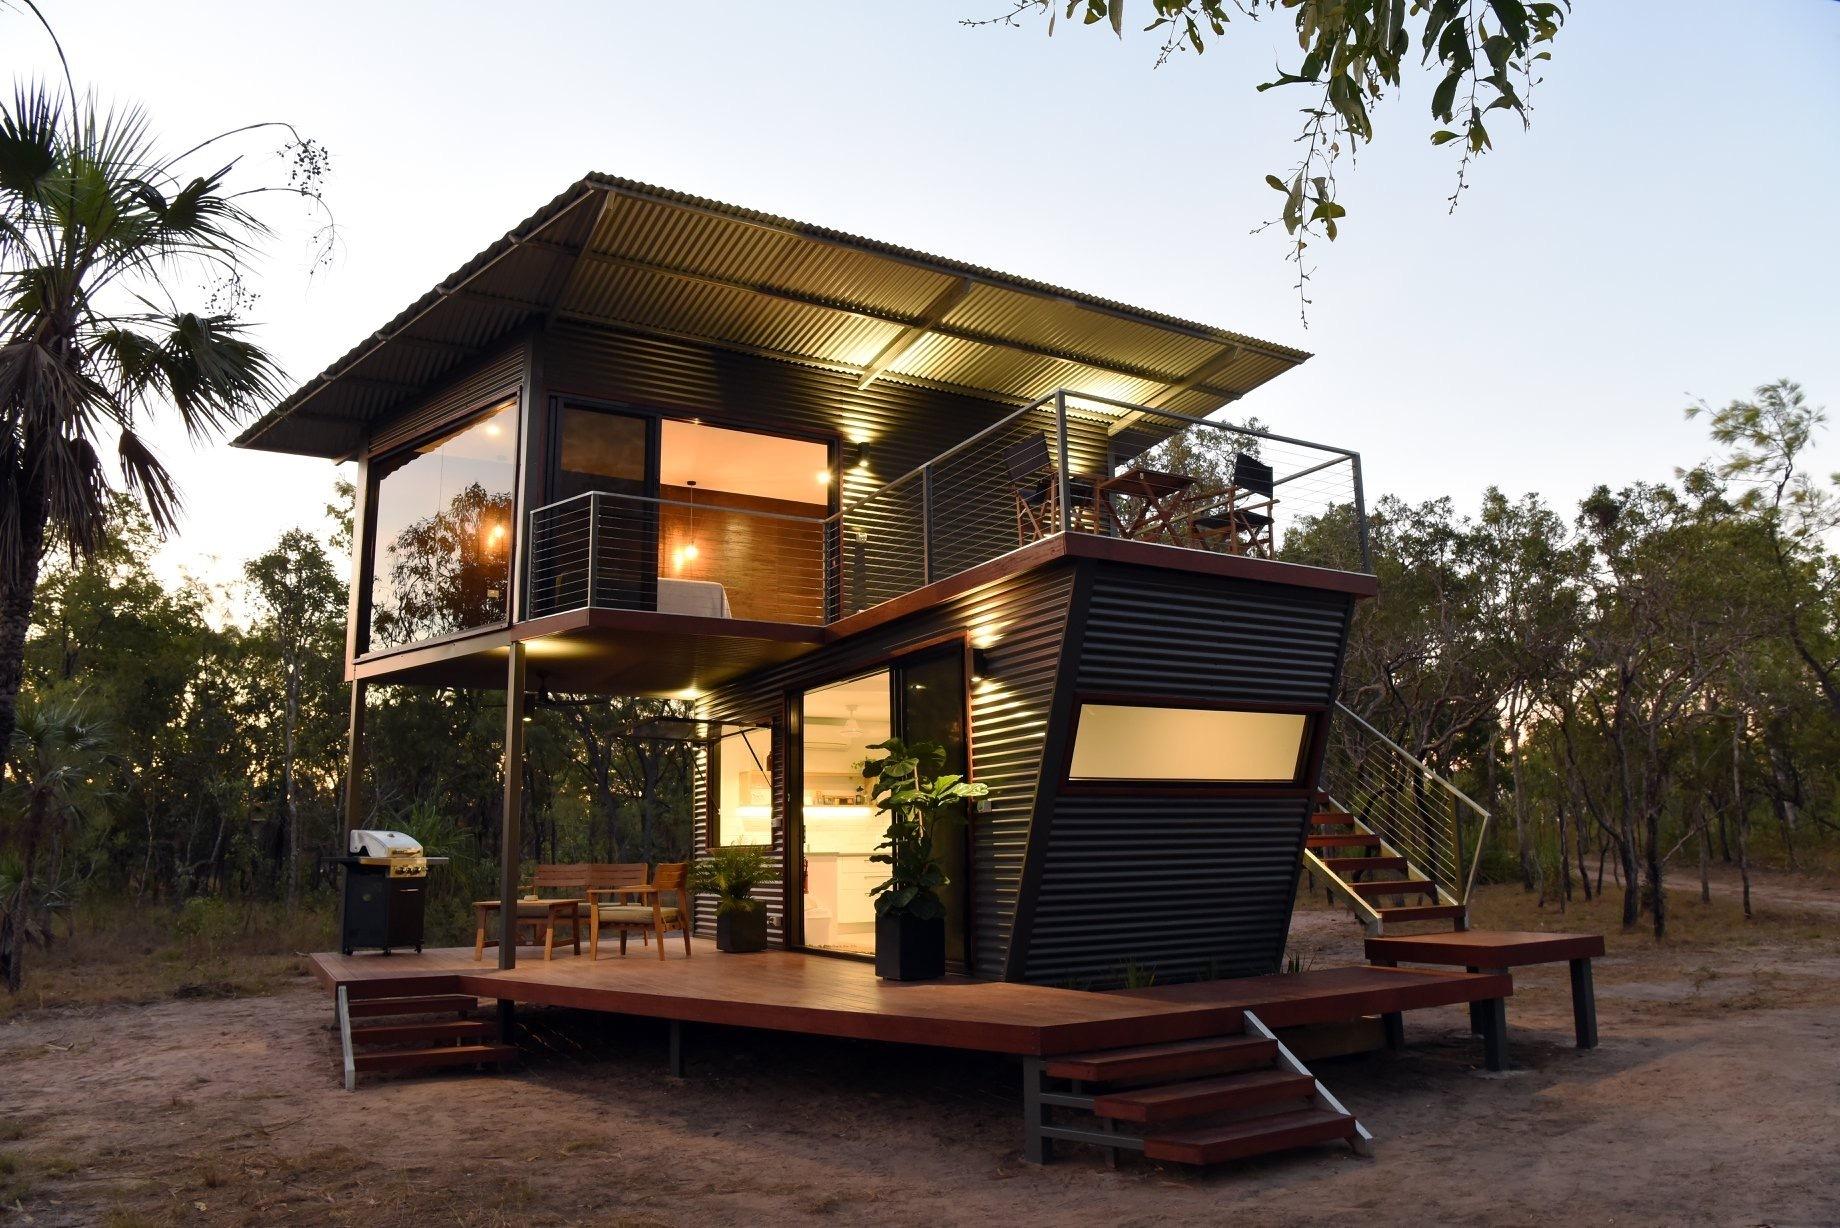 Simeon from Rakula, NT loves COLORBOND® steel, Roofing, Walling, Patio & Pergola in colour Woodland Grey®